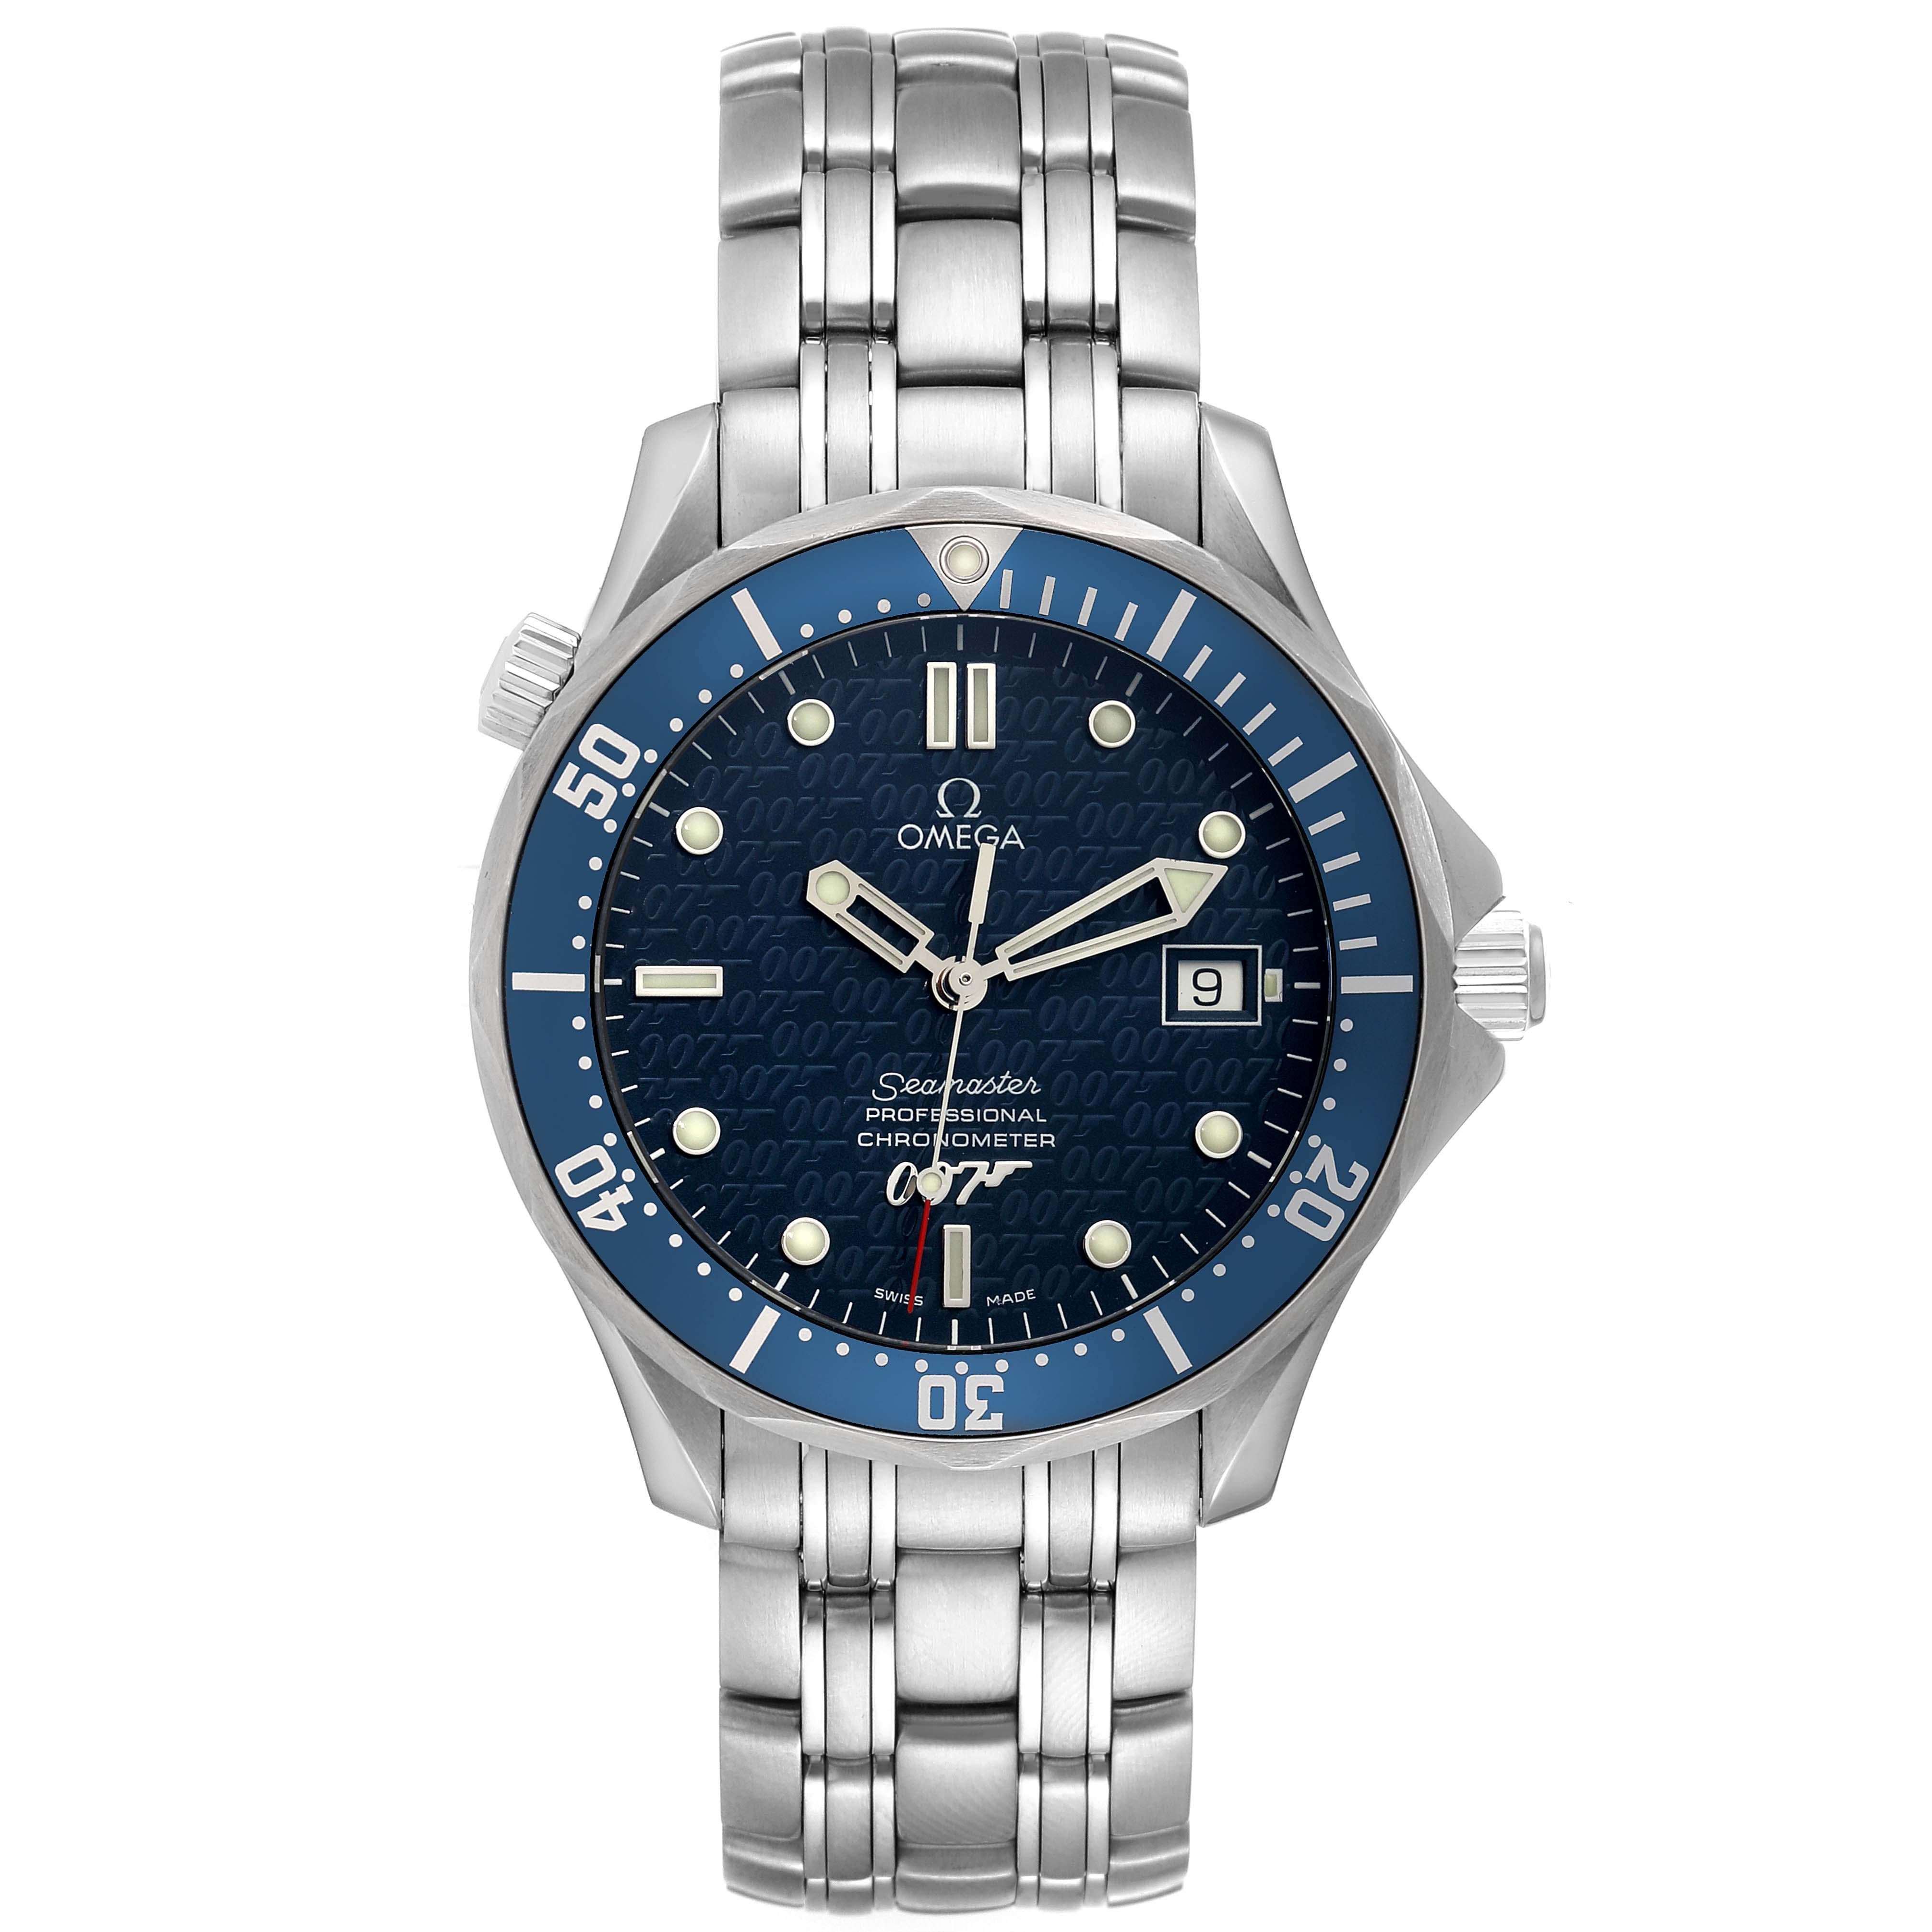 Omega Seamaster 40 Years James Bond Steel Mens Watch 2537.80.00 Box Card. Officially certified chronometer automatic self-winding movement. Brushed and polished stainless steel case 41.00 mm in diameter. Omega logo on a crown. Screw down back with